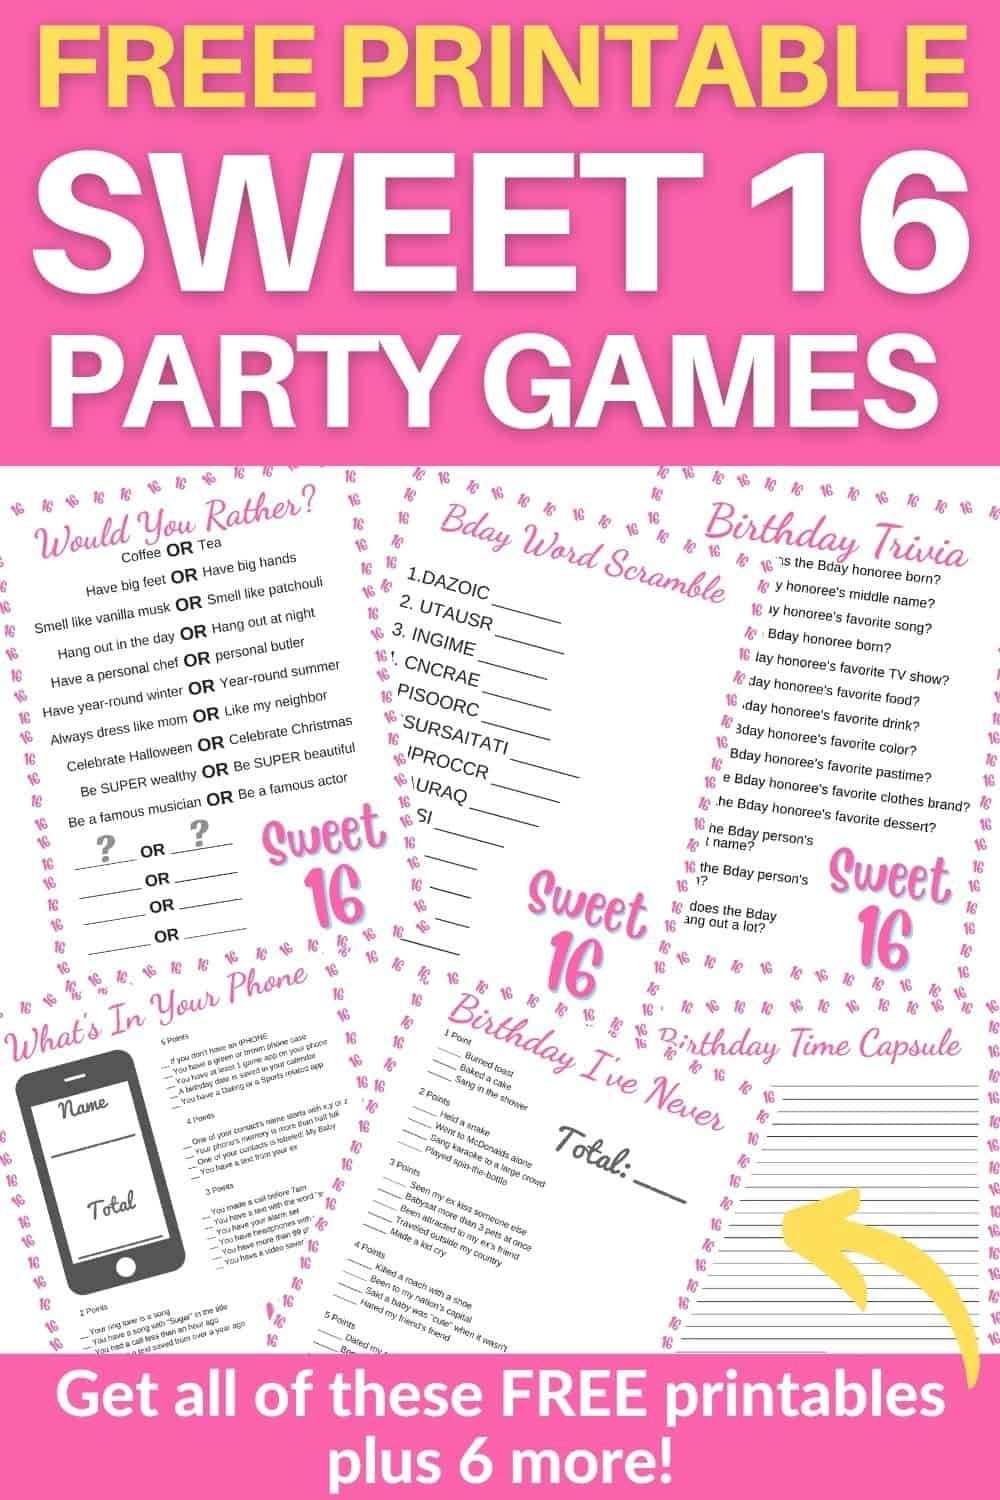 Sweet 16 Party Games Free Printables Sweet 16 Games Sweet 16 Parties Sweet 16 Party Themes